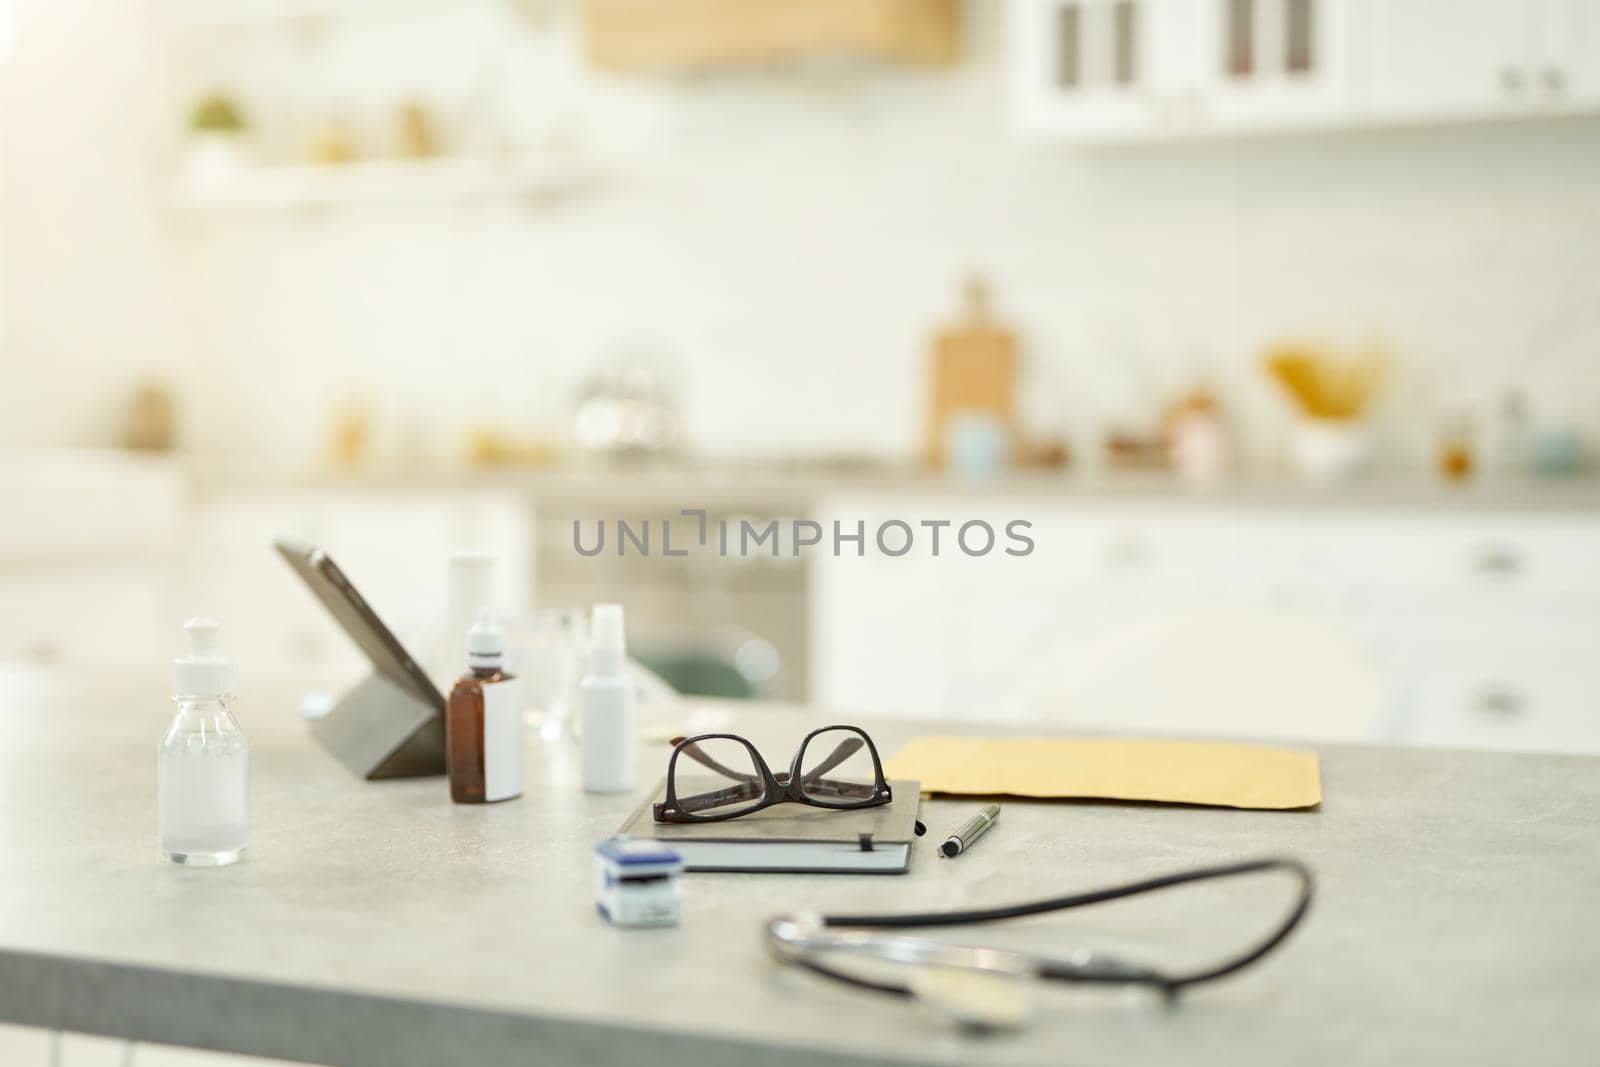 Set-up for a quick medical consultation at home by friendsstock